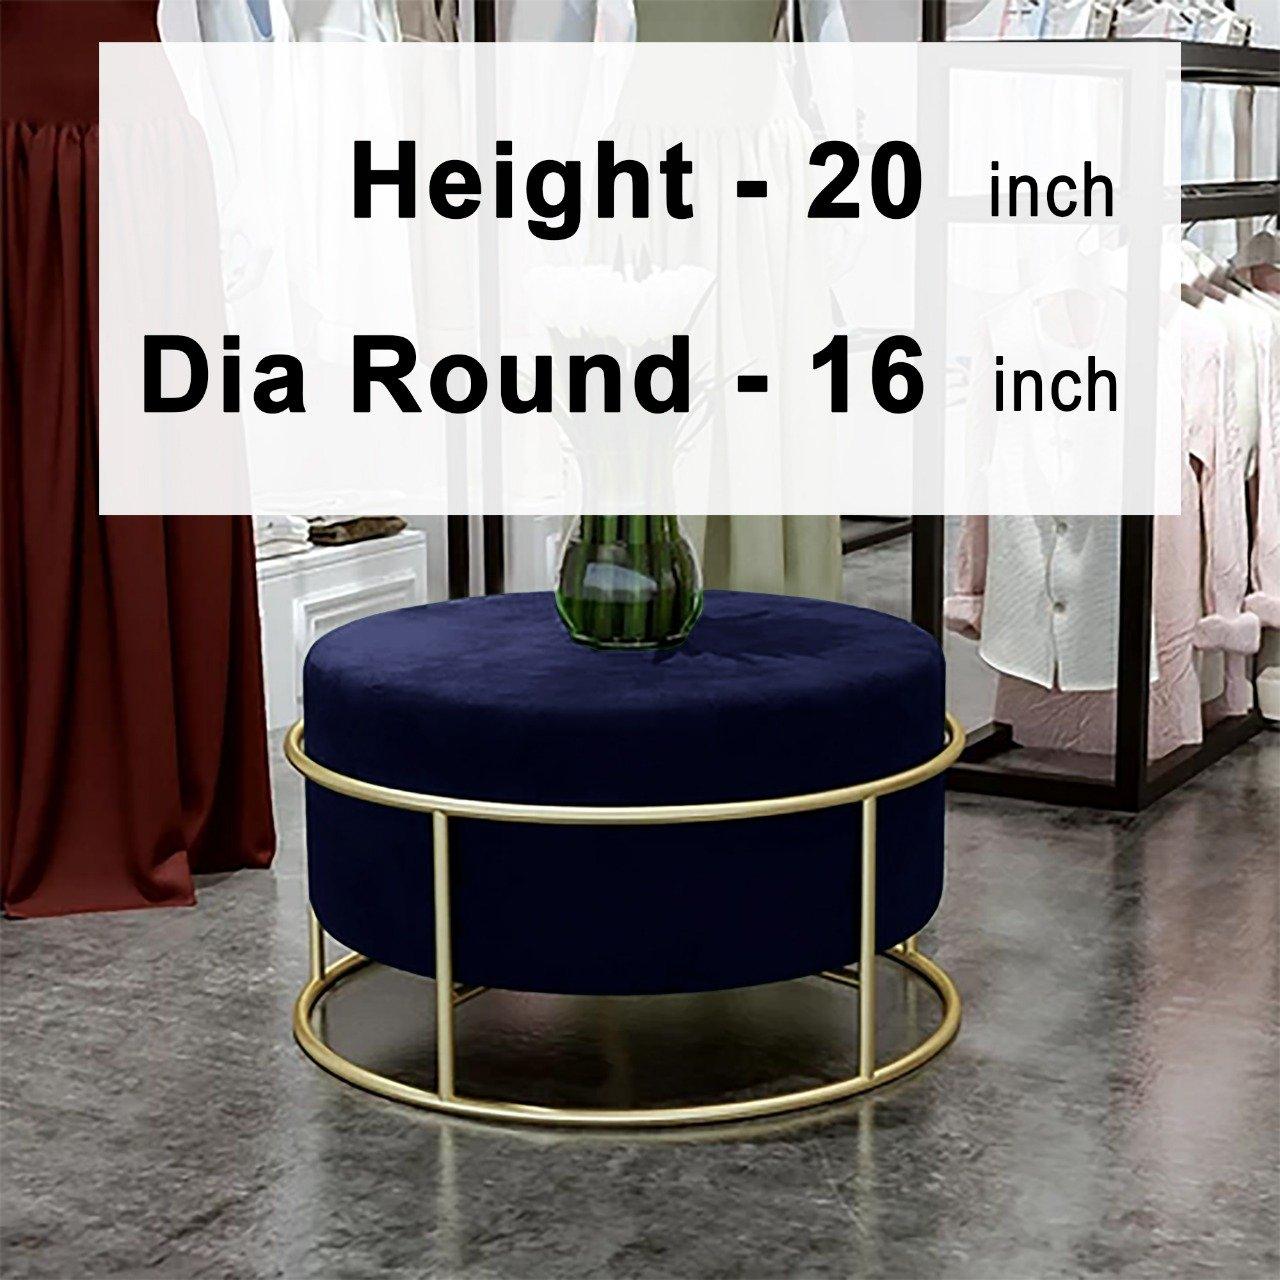 Luxury Wooden Round stool With Steel Stand -300 - 92Bedding